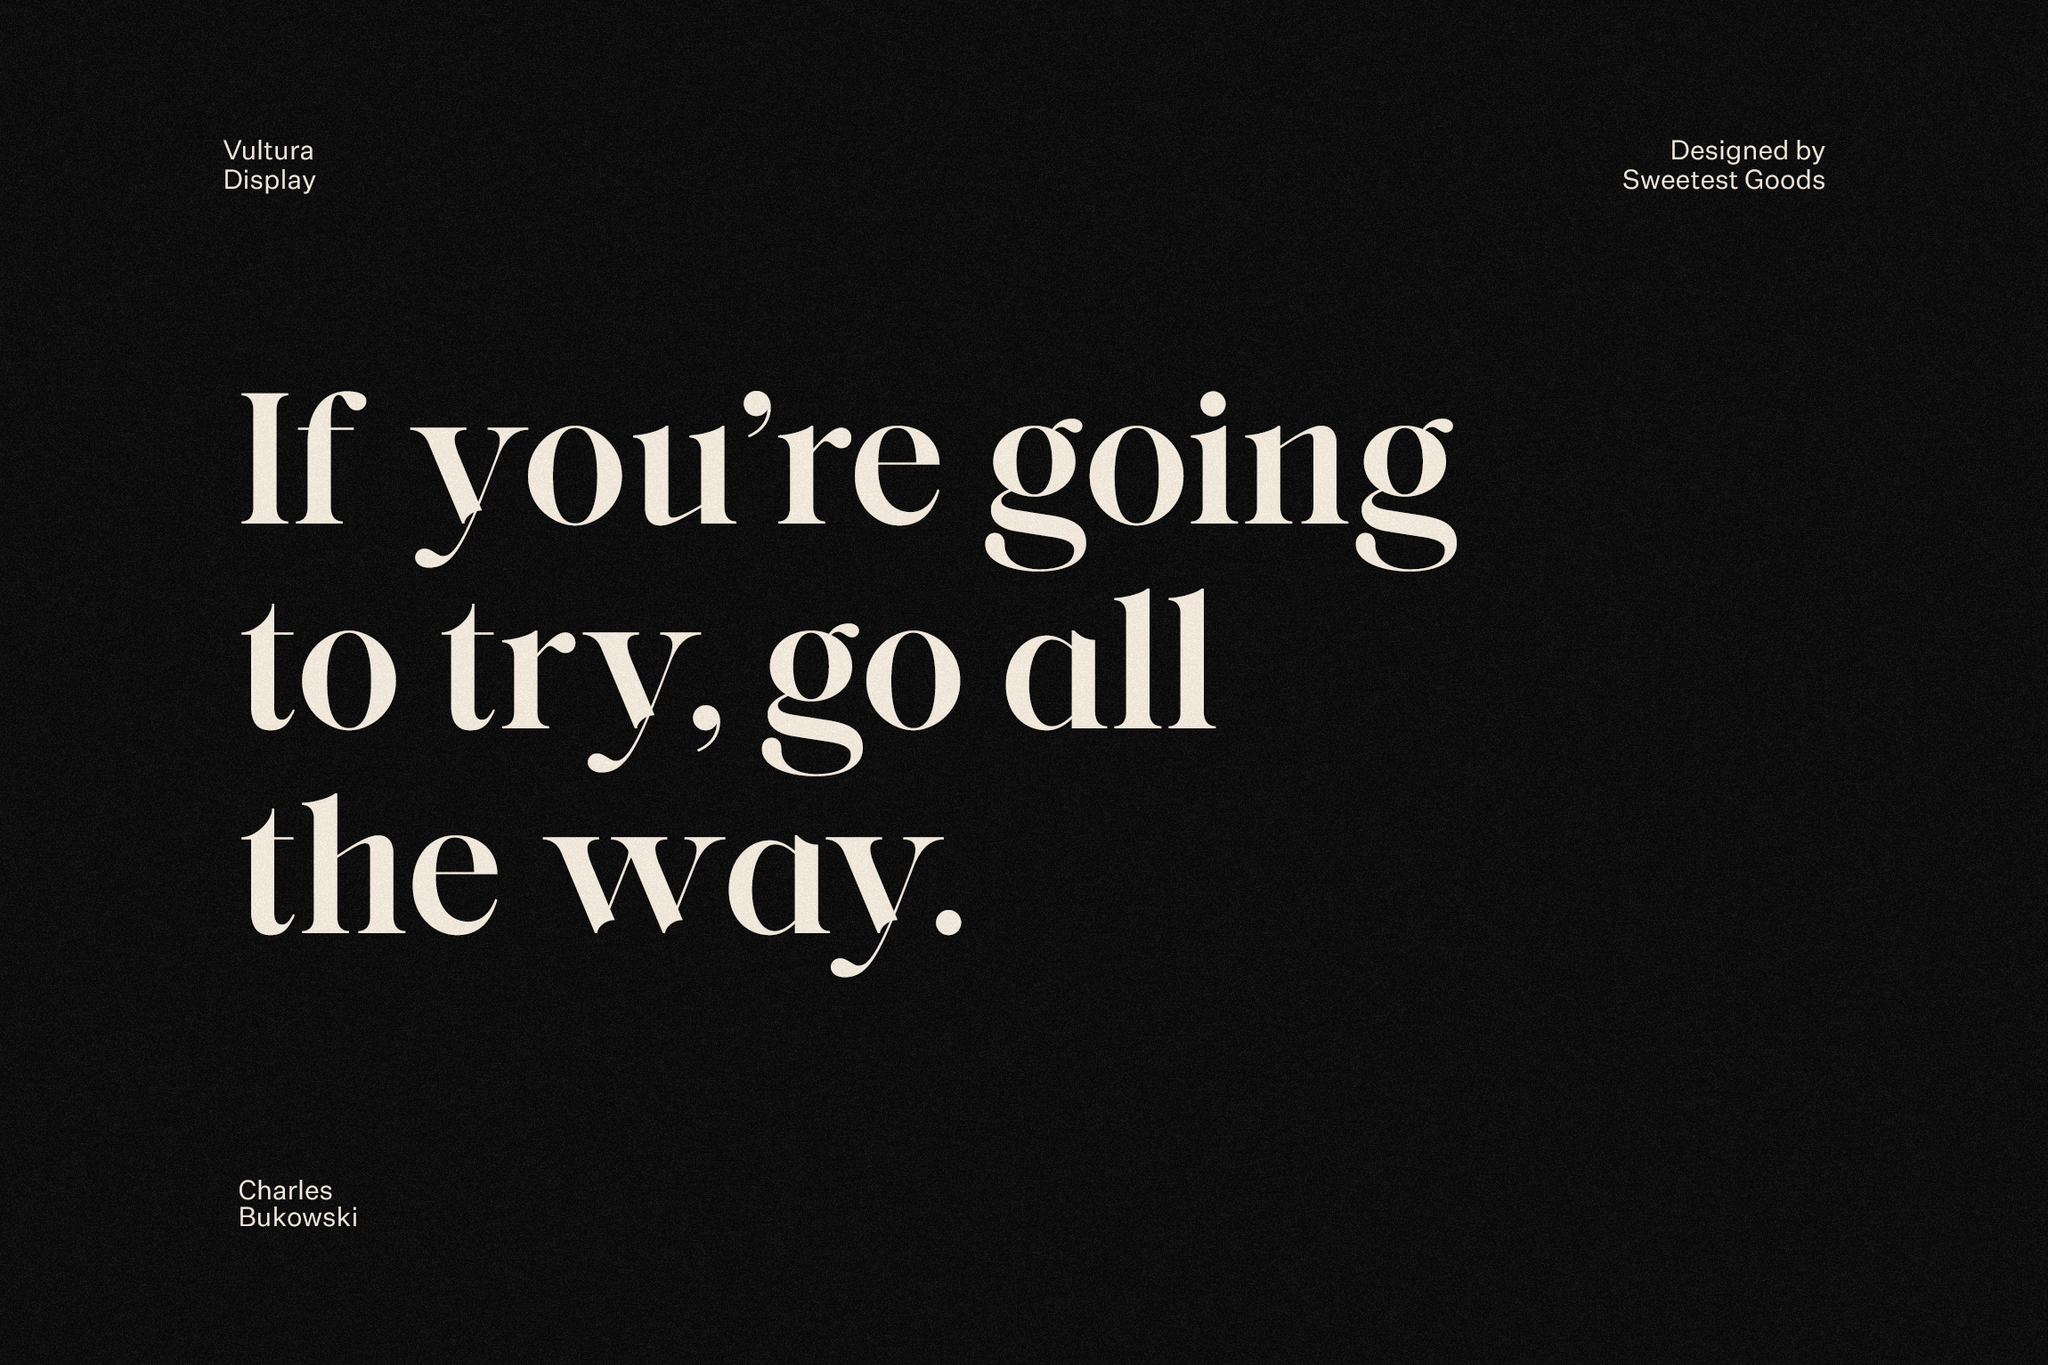 Vultura Typeface - If you're going to try, go all the way - Charles Bukowski - Quote Typography